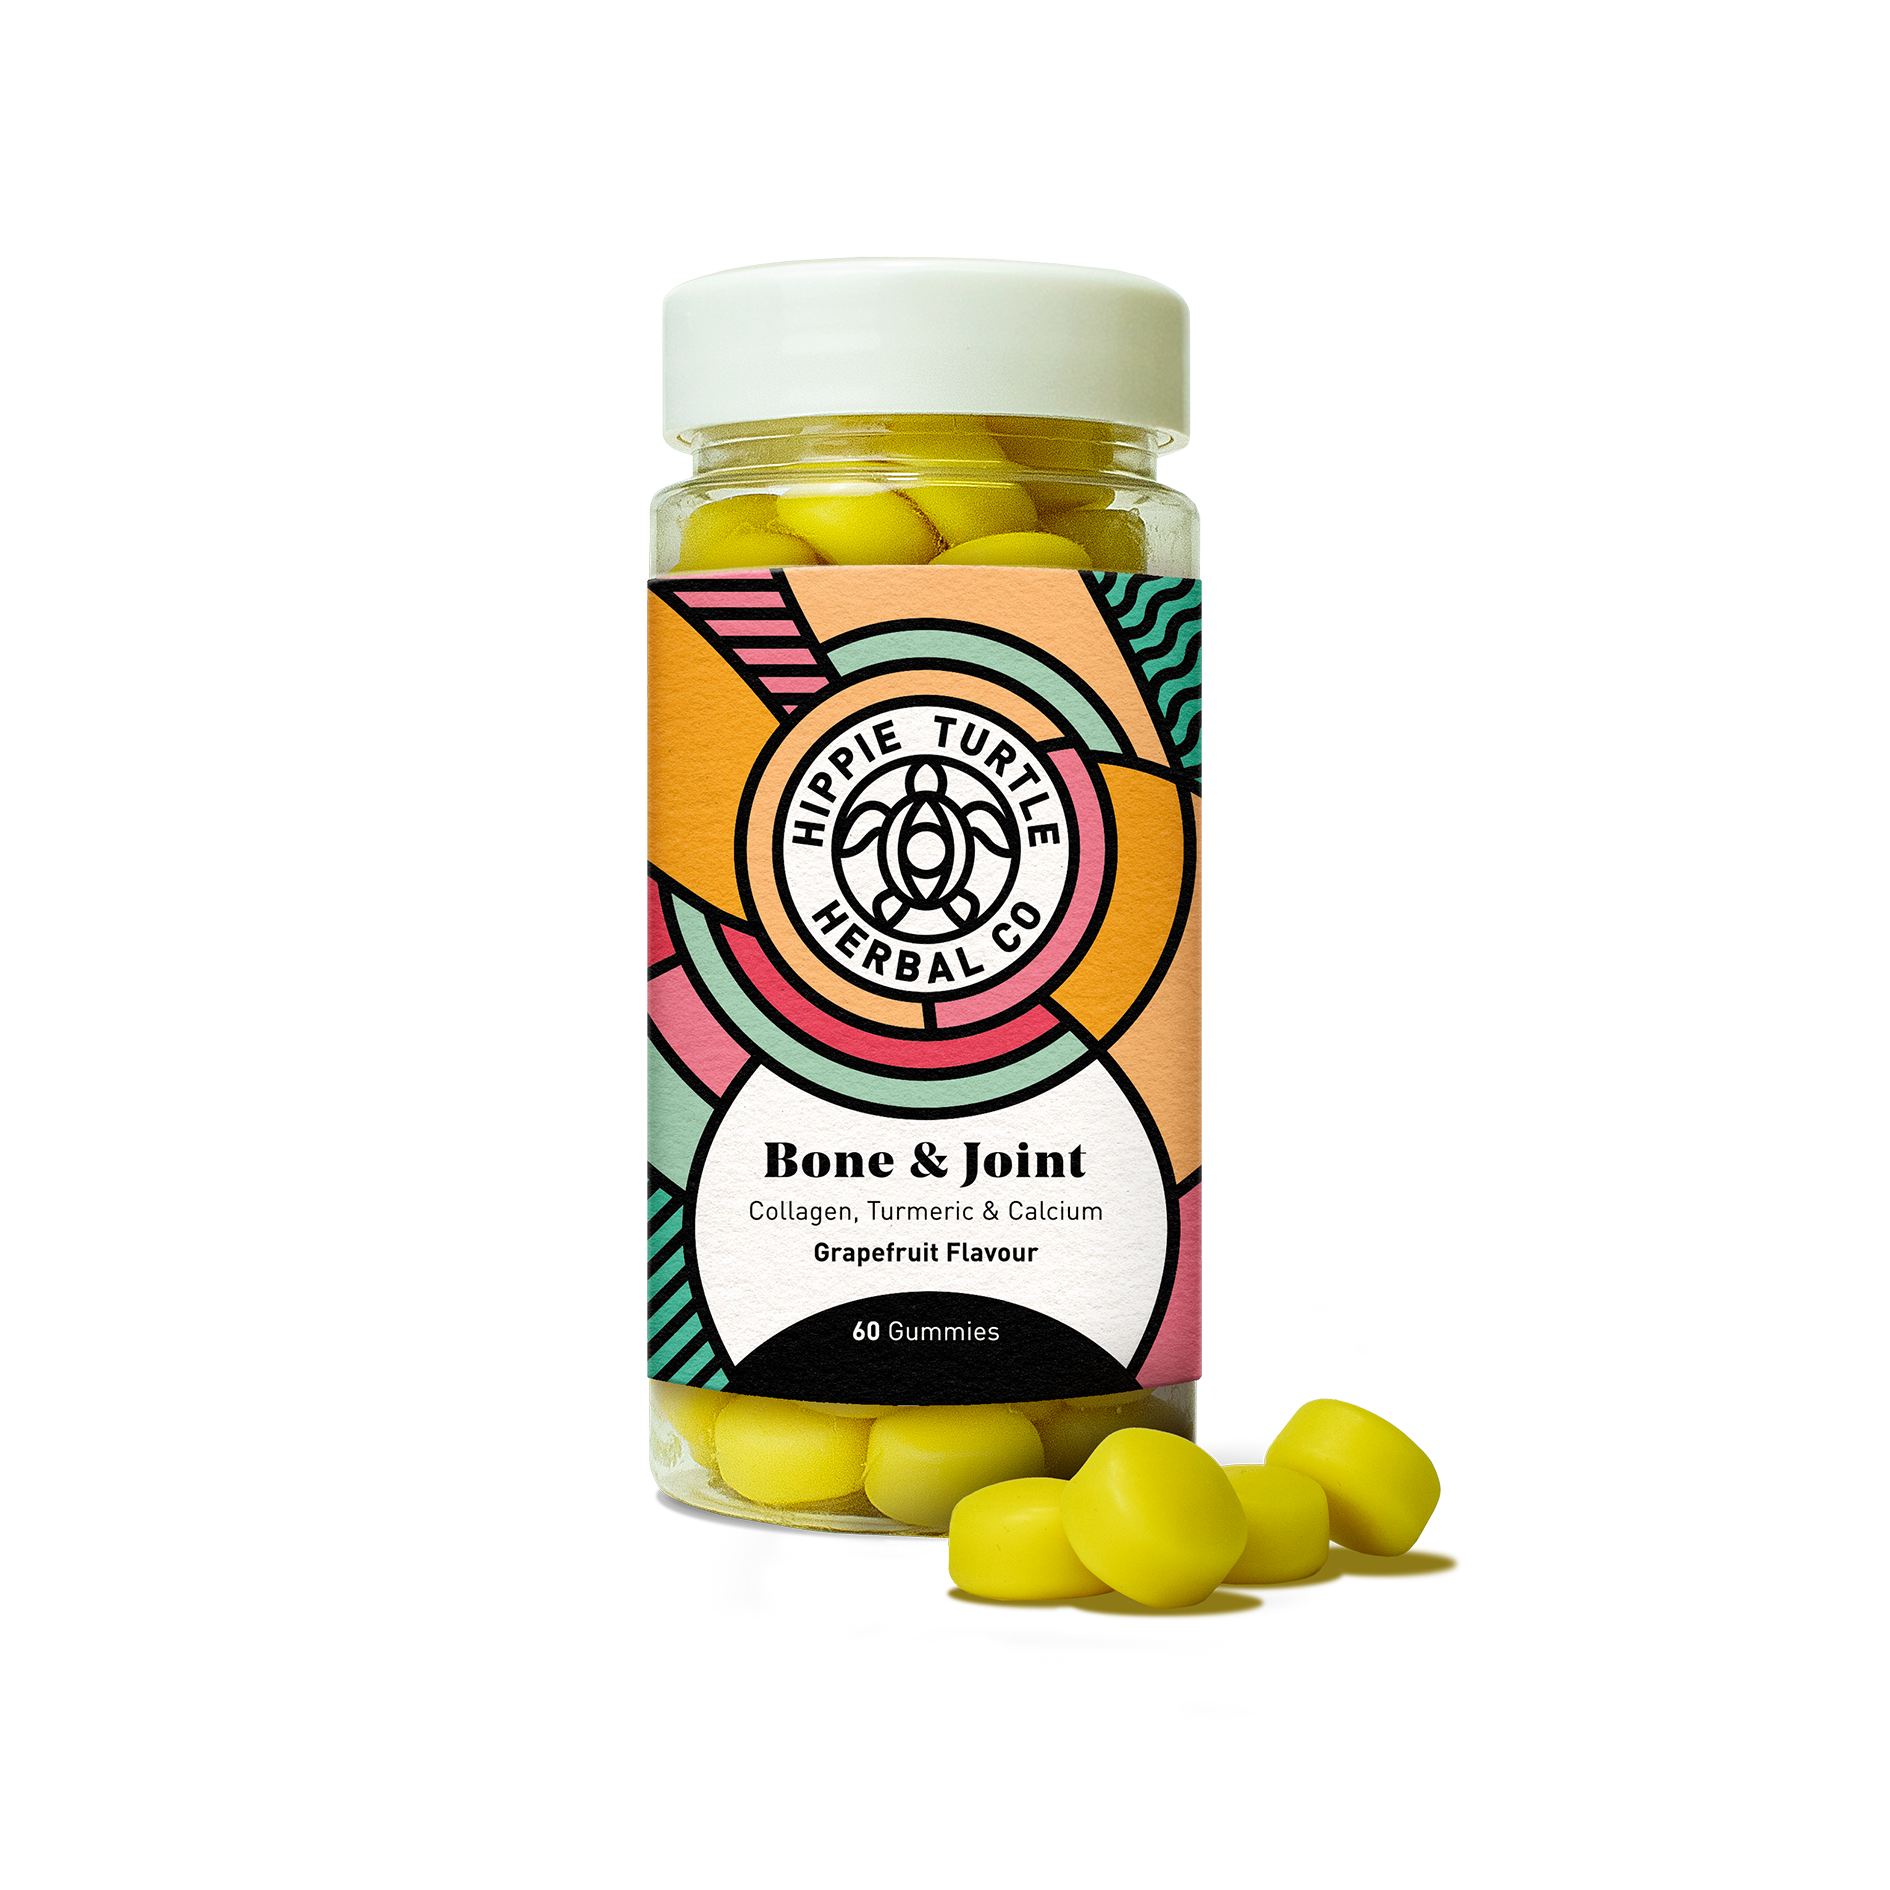 Hippie Turtle Herbal Co Bone & Joint supplement gummies with marine collagen, turmeric, calcium, vitamin d and vitamin e in chewable gummy